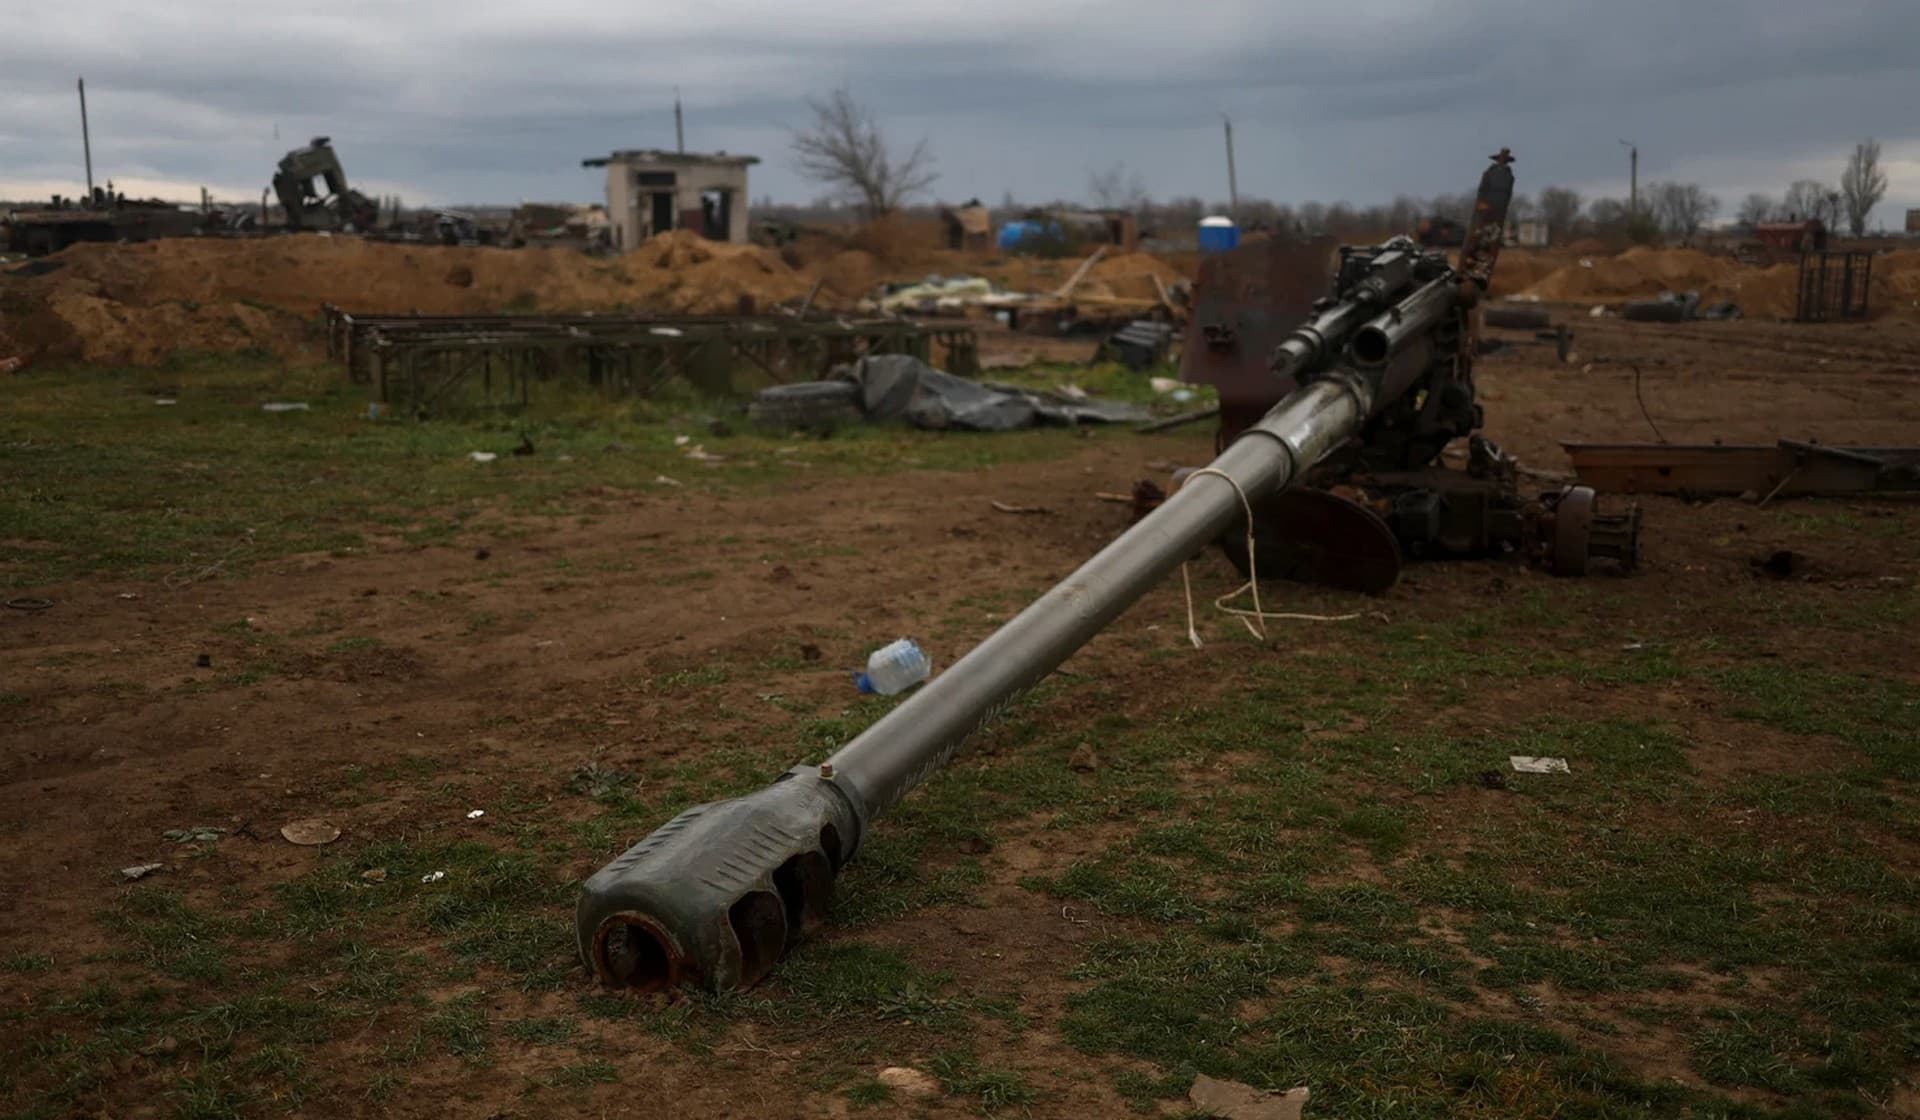 A destroyed Russian howitzer at a compound of an international airport after Russia's retreat from Kherson in Chornobaivka outside of Kherson